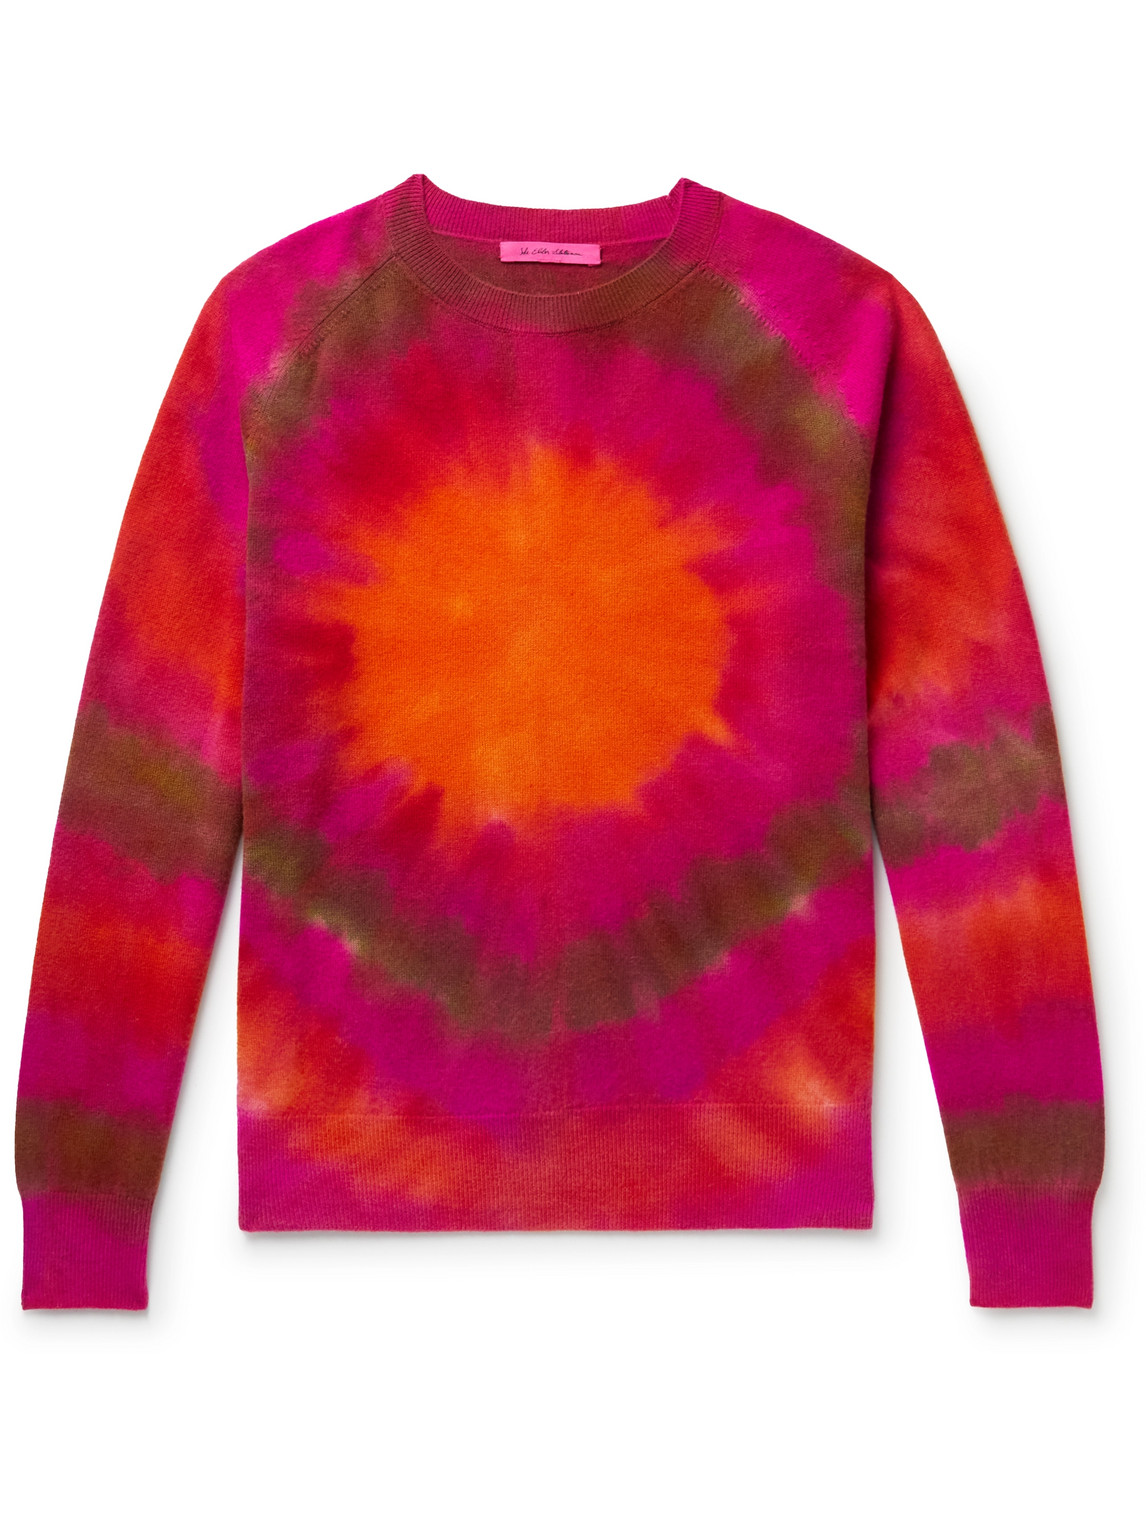 THE ELDER STATESMAN TIE-DYED MERINO WOOL AND CASHMERE-BLEND SWEATER